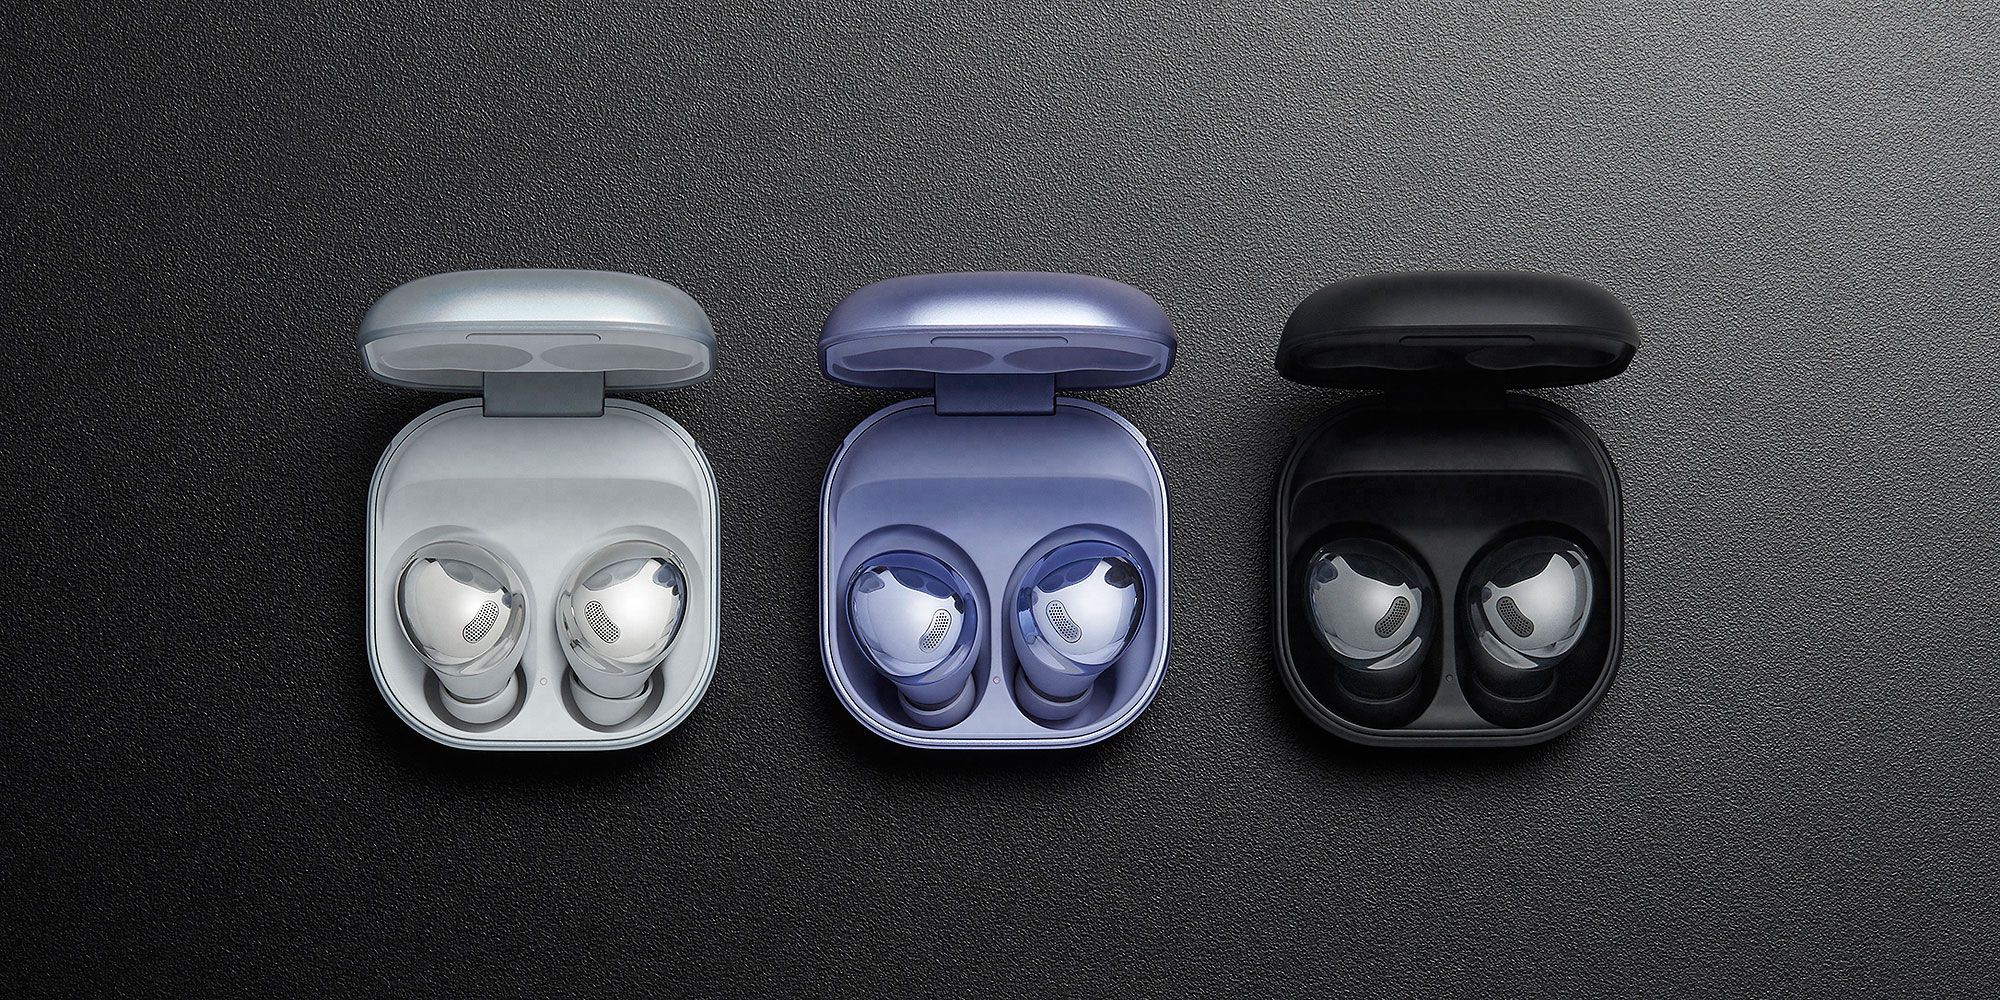 Sets of Samsung Galaxy Buds Pro in charging cases